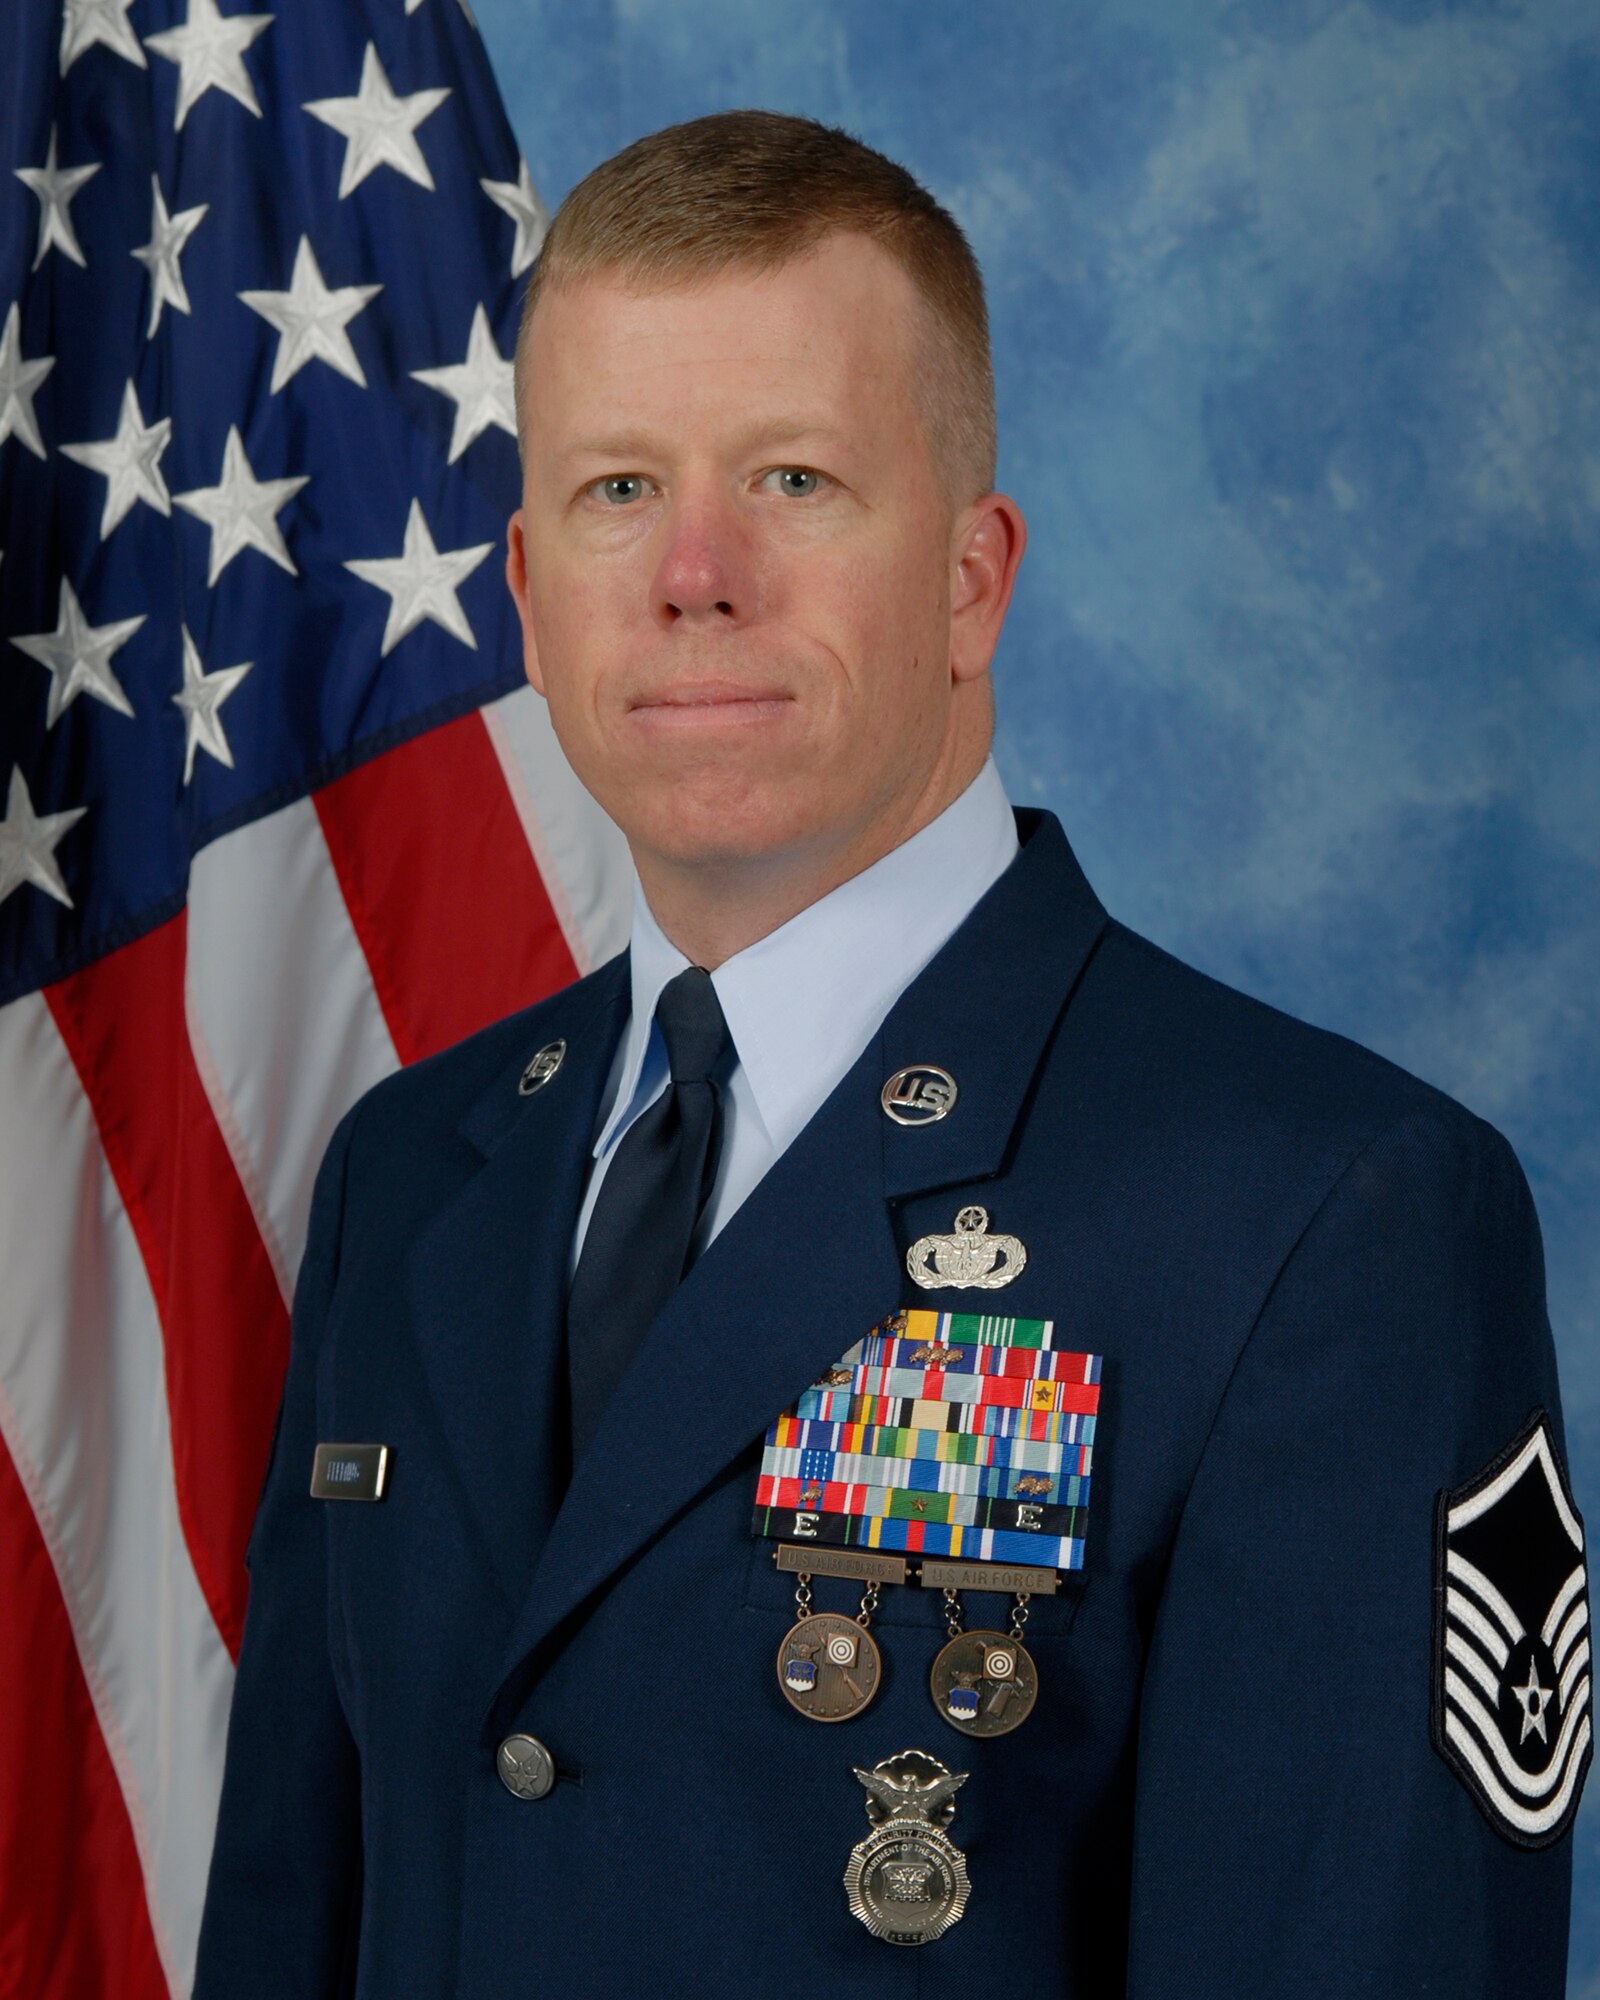 Master Sgt. Anthony Fleming, 17th Security Forces Squadron is the 2009 Senior Noncommissioned Officer of the Year for the 17th Training Wing, Goodfellow AFB, Texas. The annual awards program recognizes both civilians and members in 16 categories of the Air Force, Army, Navy and Marines who are assigned to the wing, for their significant contributions to the 17 TRW, the community and mission. (U.S. Air Force photo/ Lou Czarnecki) 